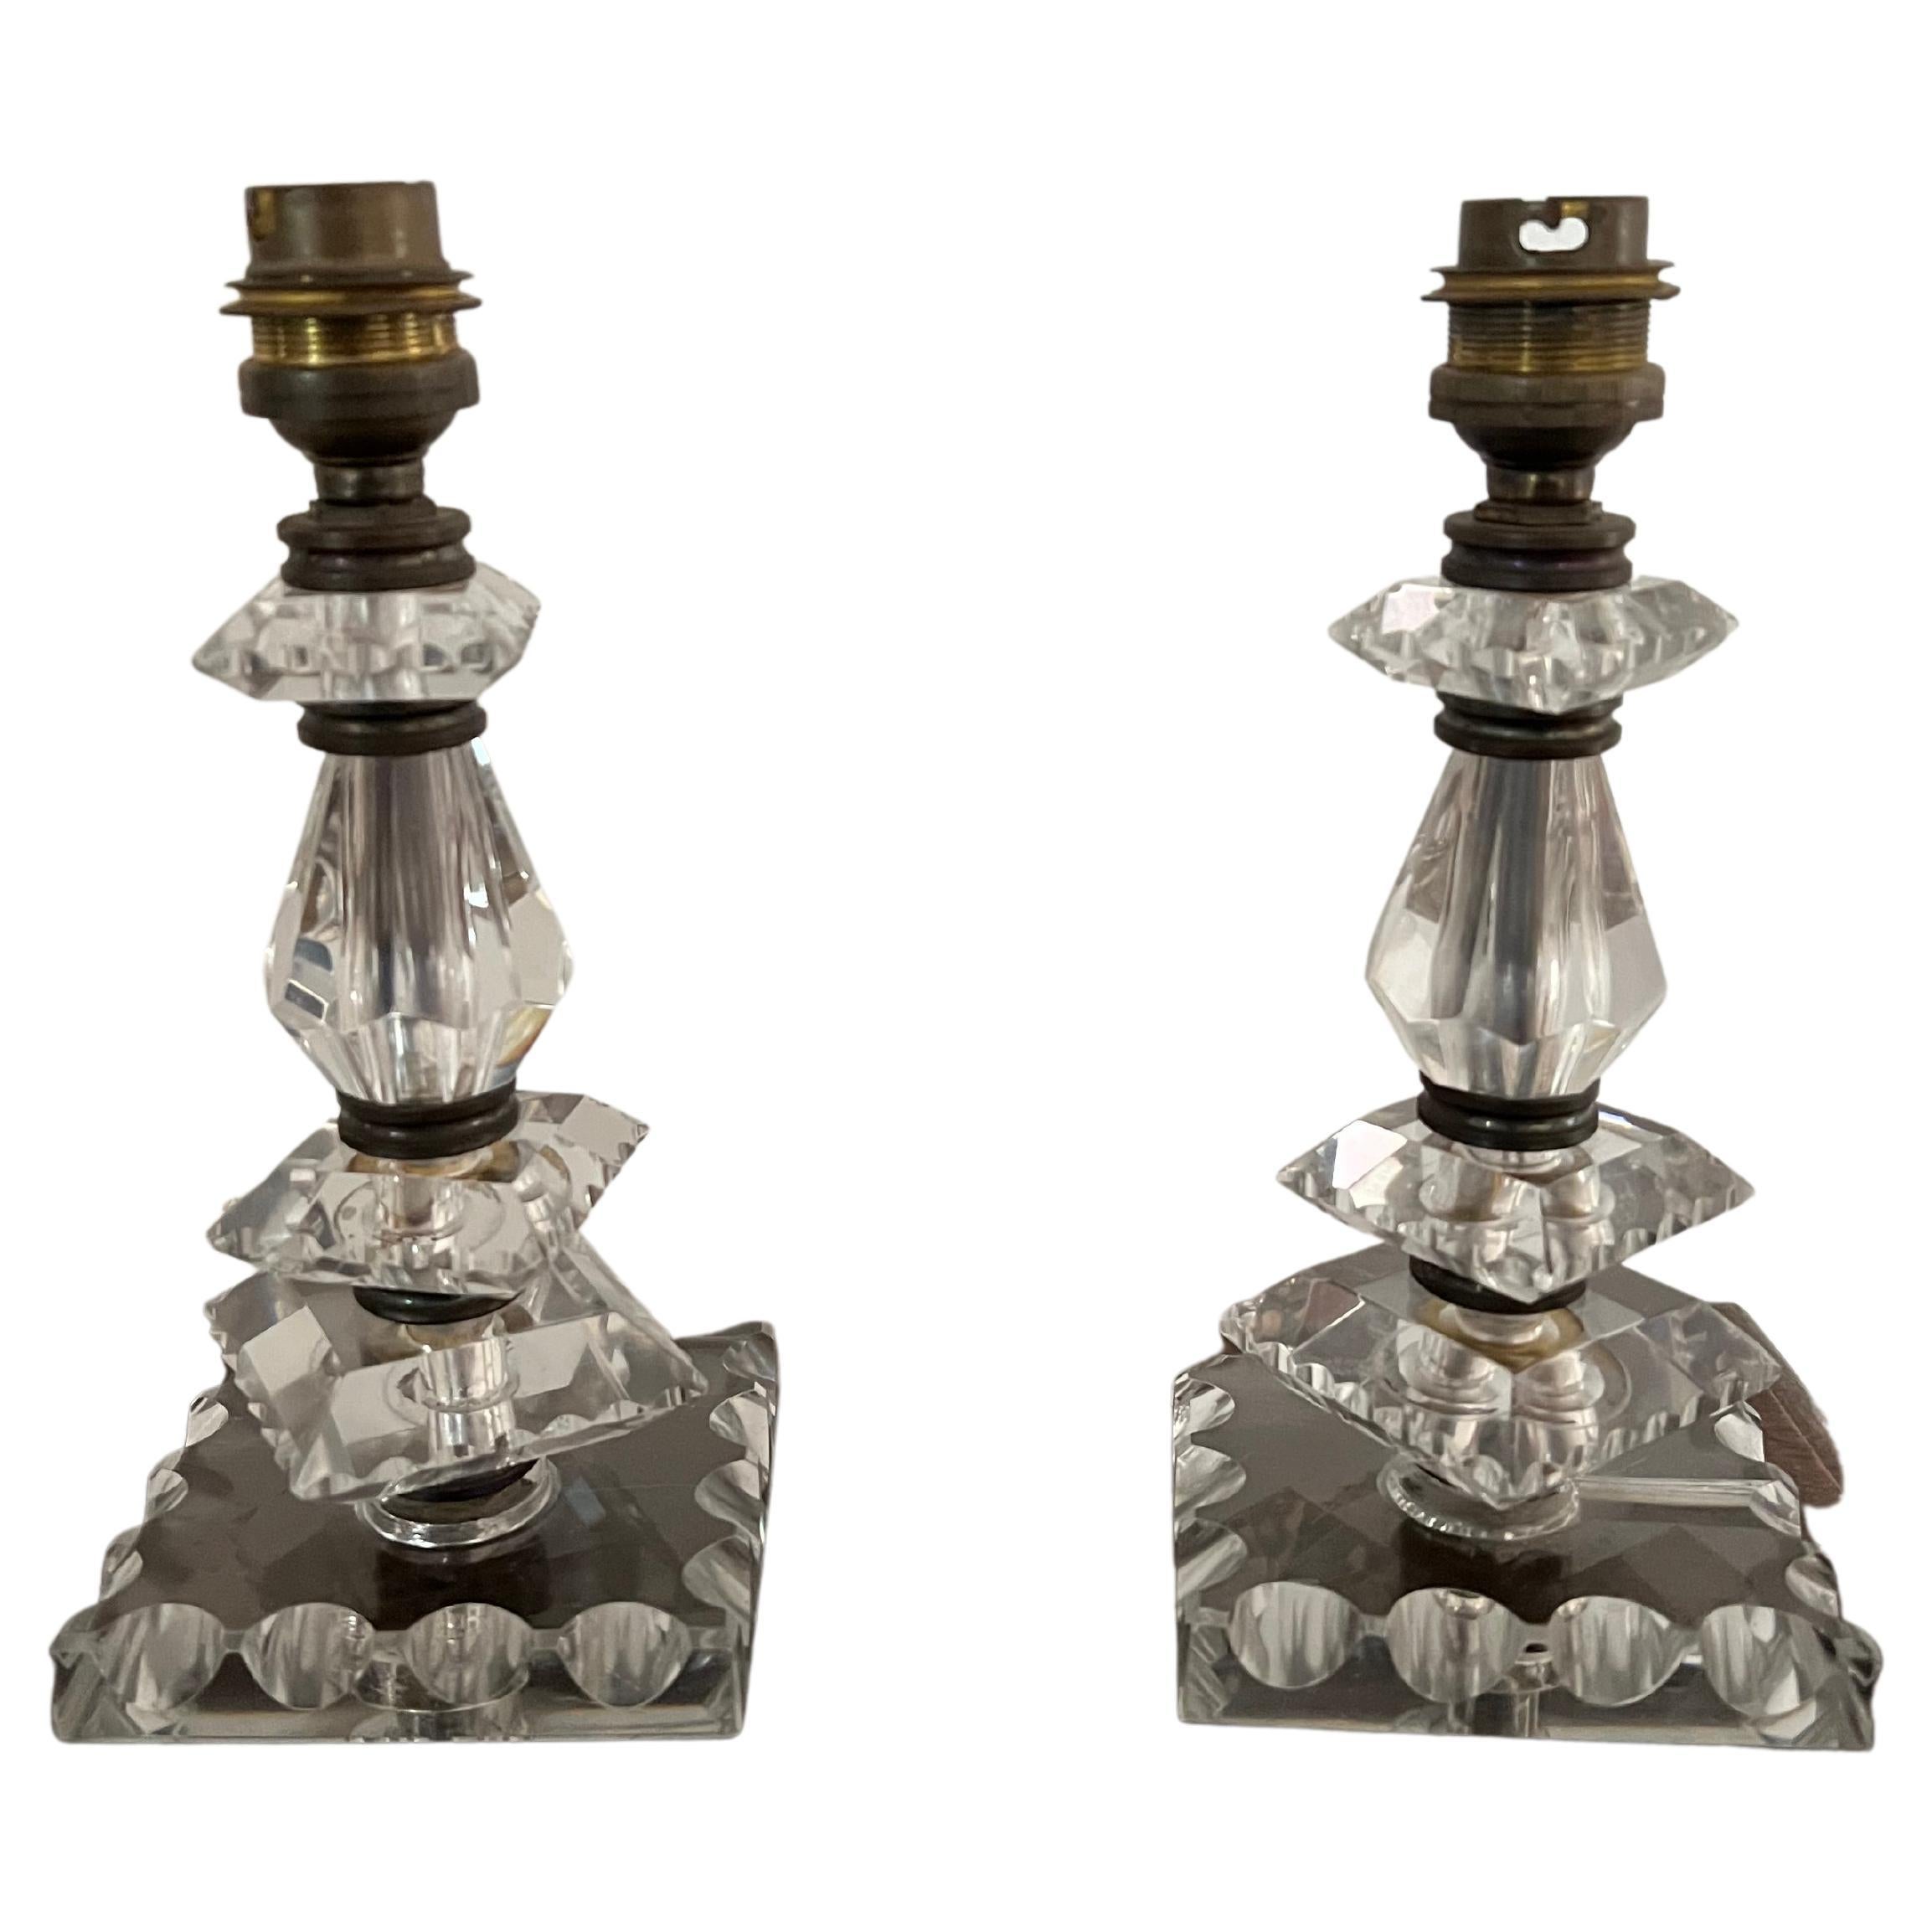 Pair of Art Deco Lamps by Baccarat, France circa 1940, Attr. to Jacques Adnet For Sale